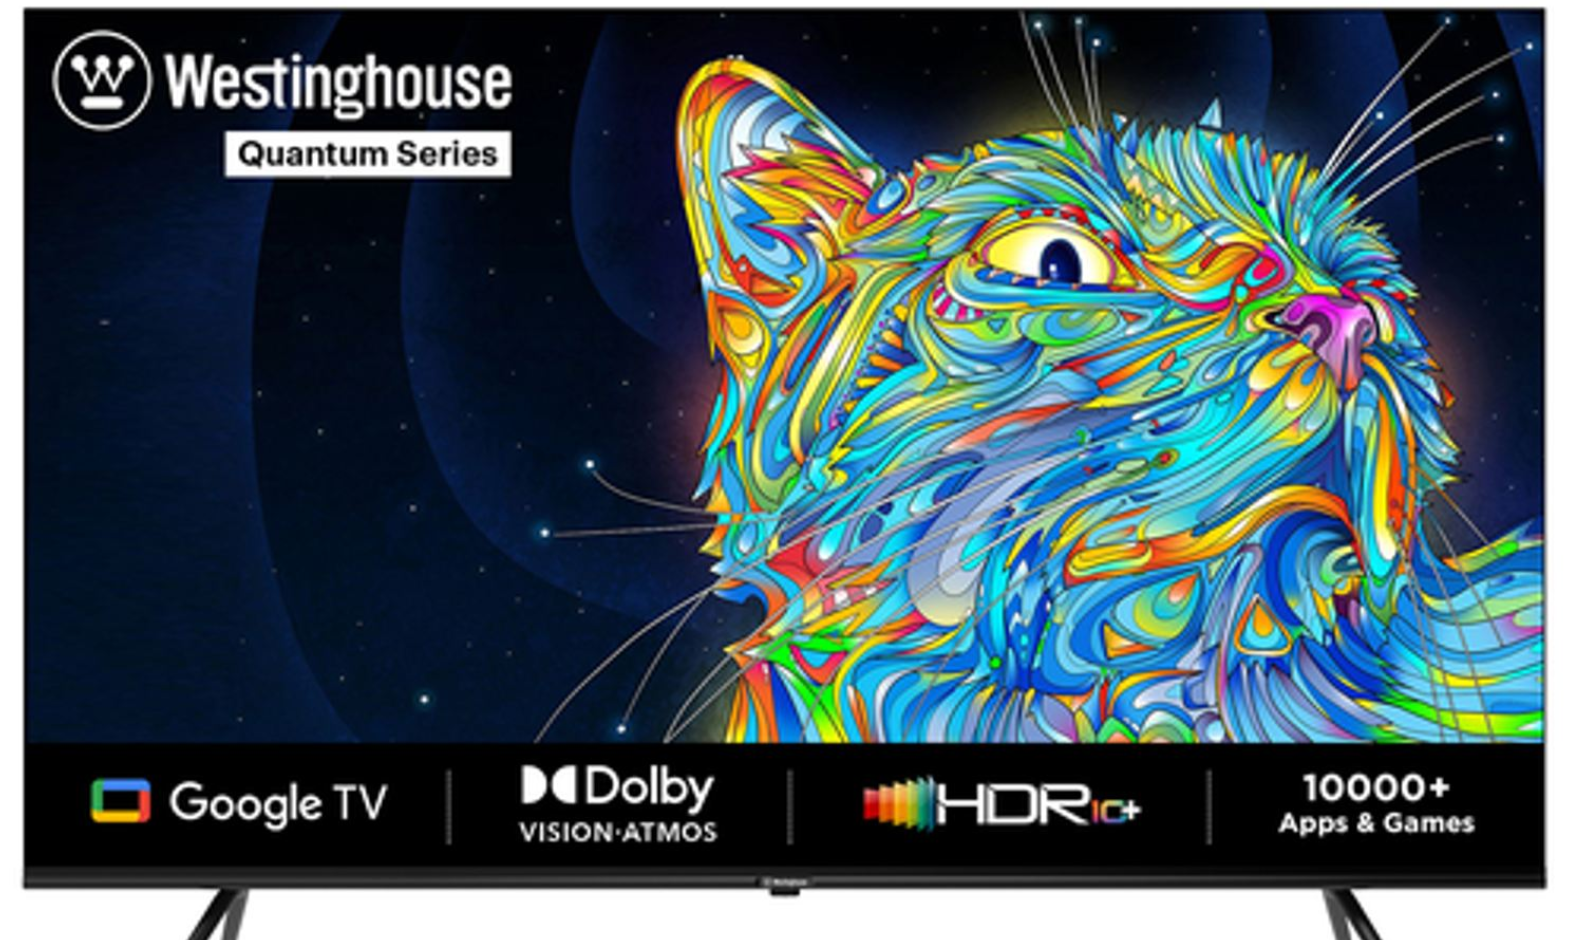 Westinghouse launches 5 new QLED TVs